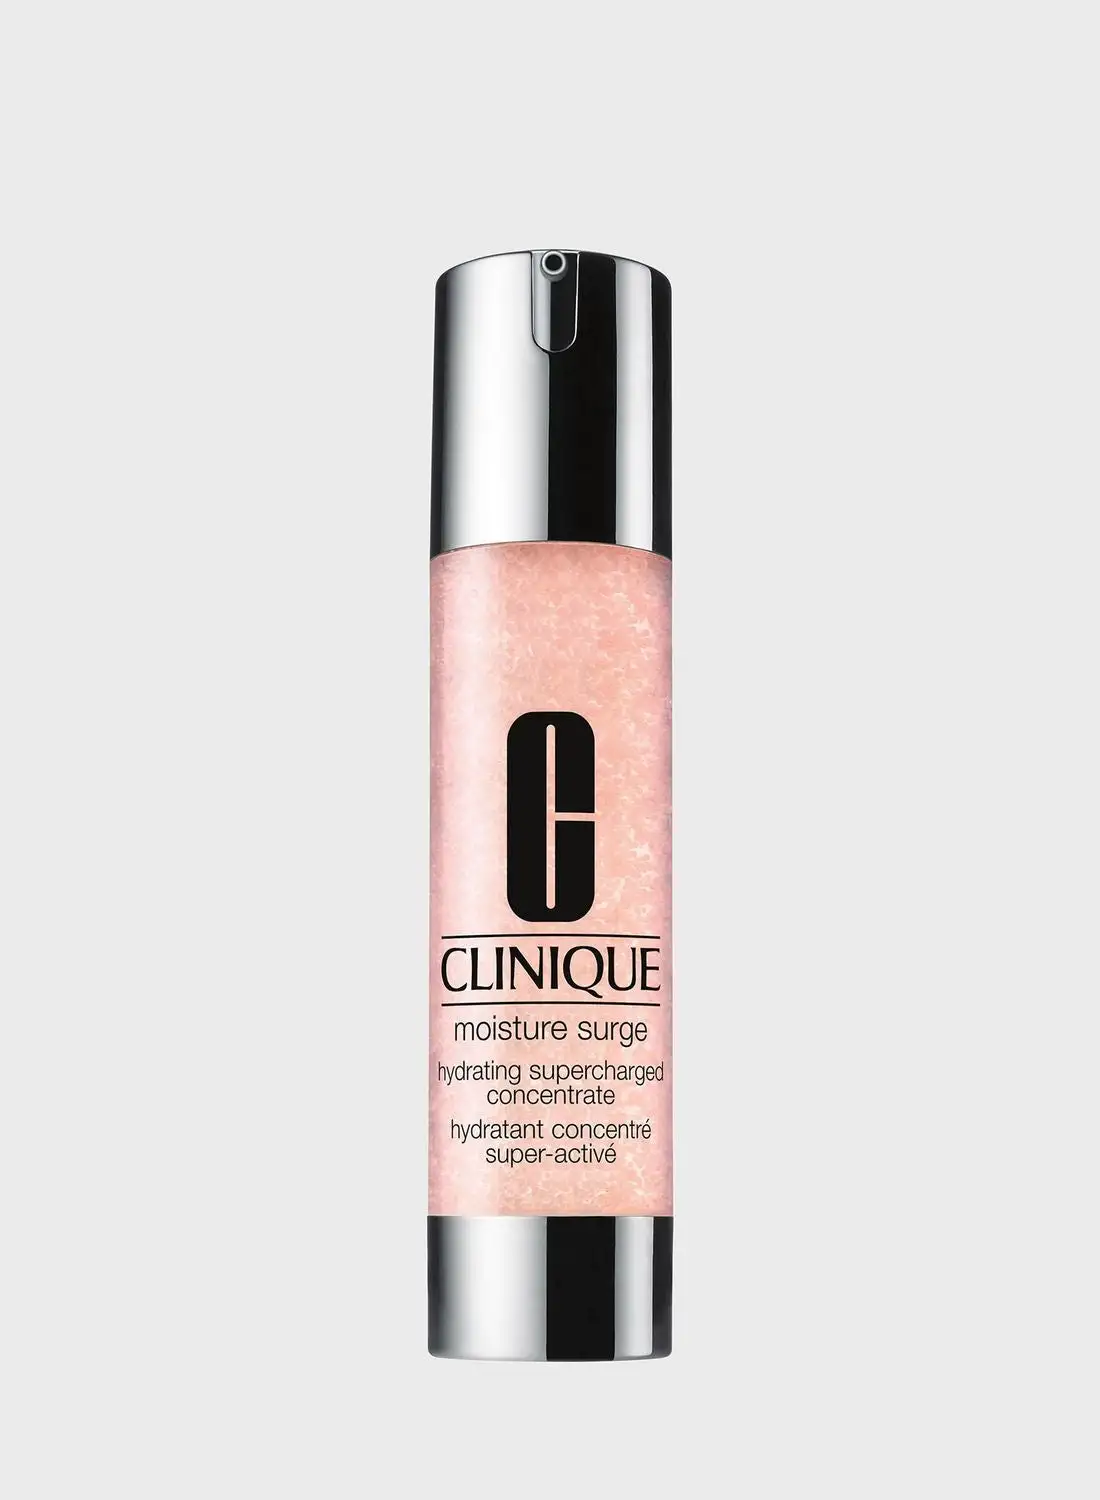 CLINIQUE Moisture Surge Hydrating Supercharged Concentrate